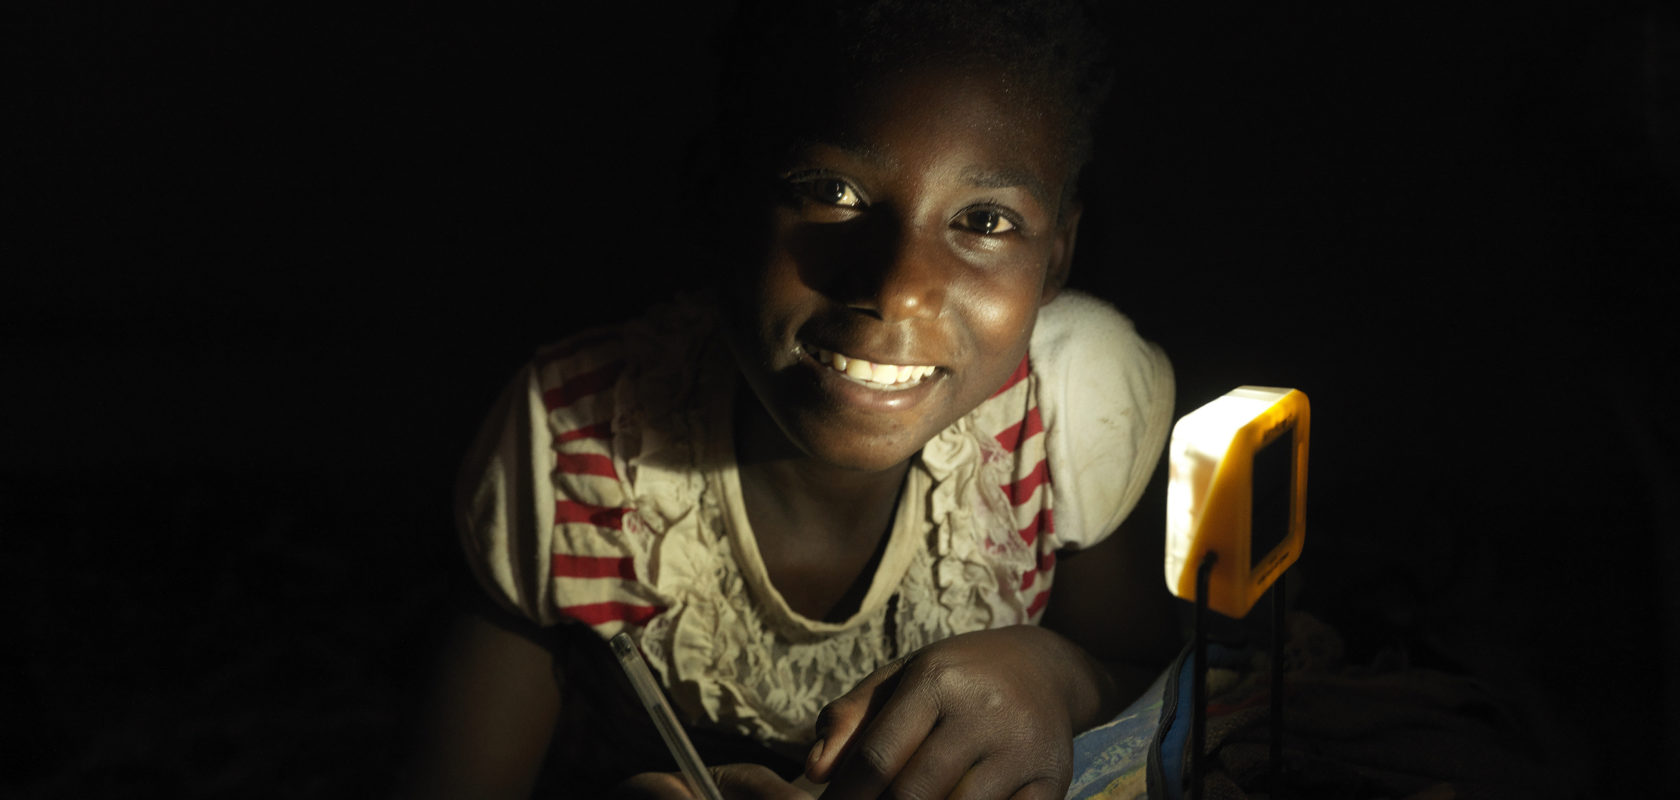 Agnes completes her home work under solar light in her rural Zambien home.